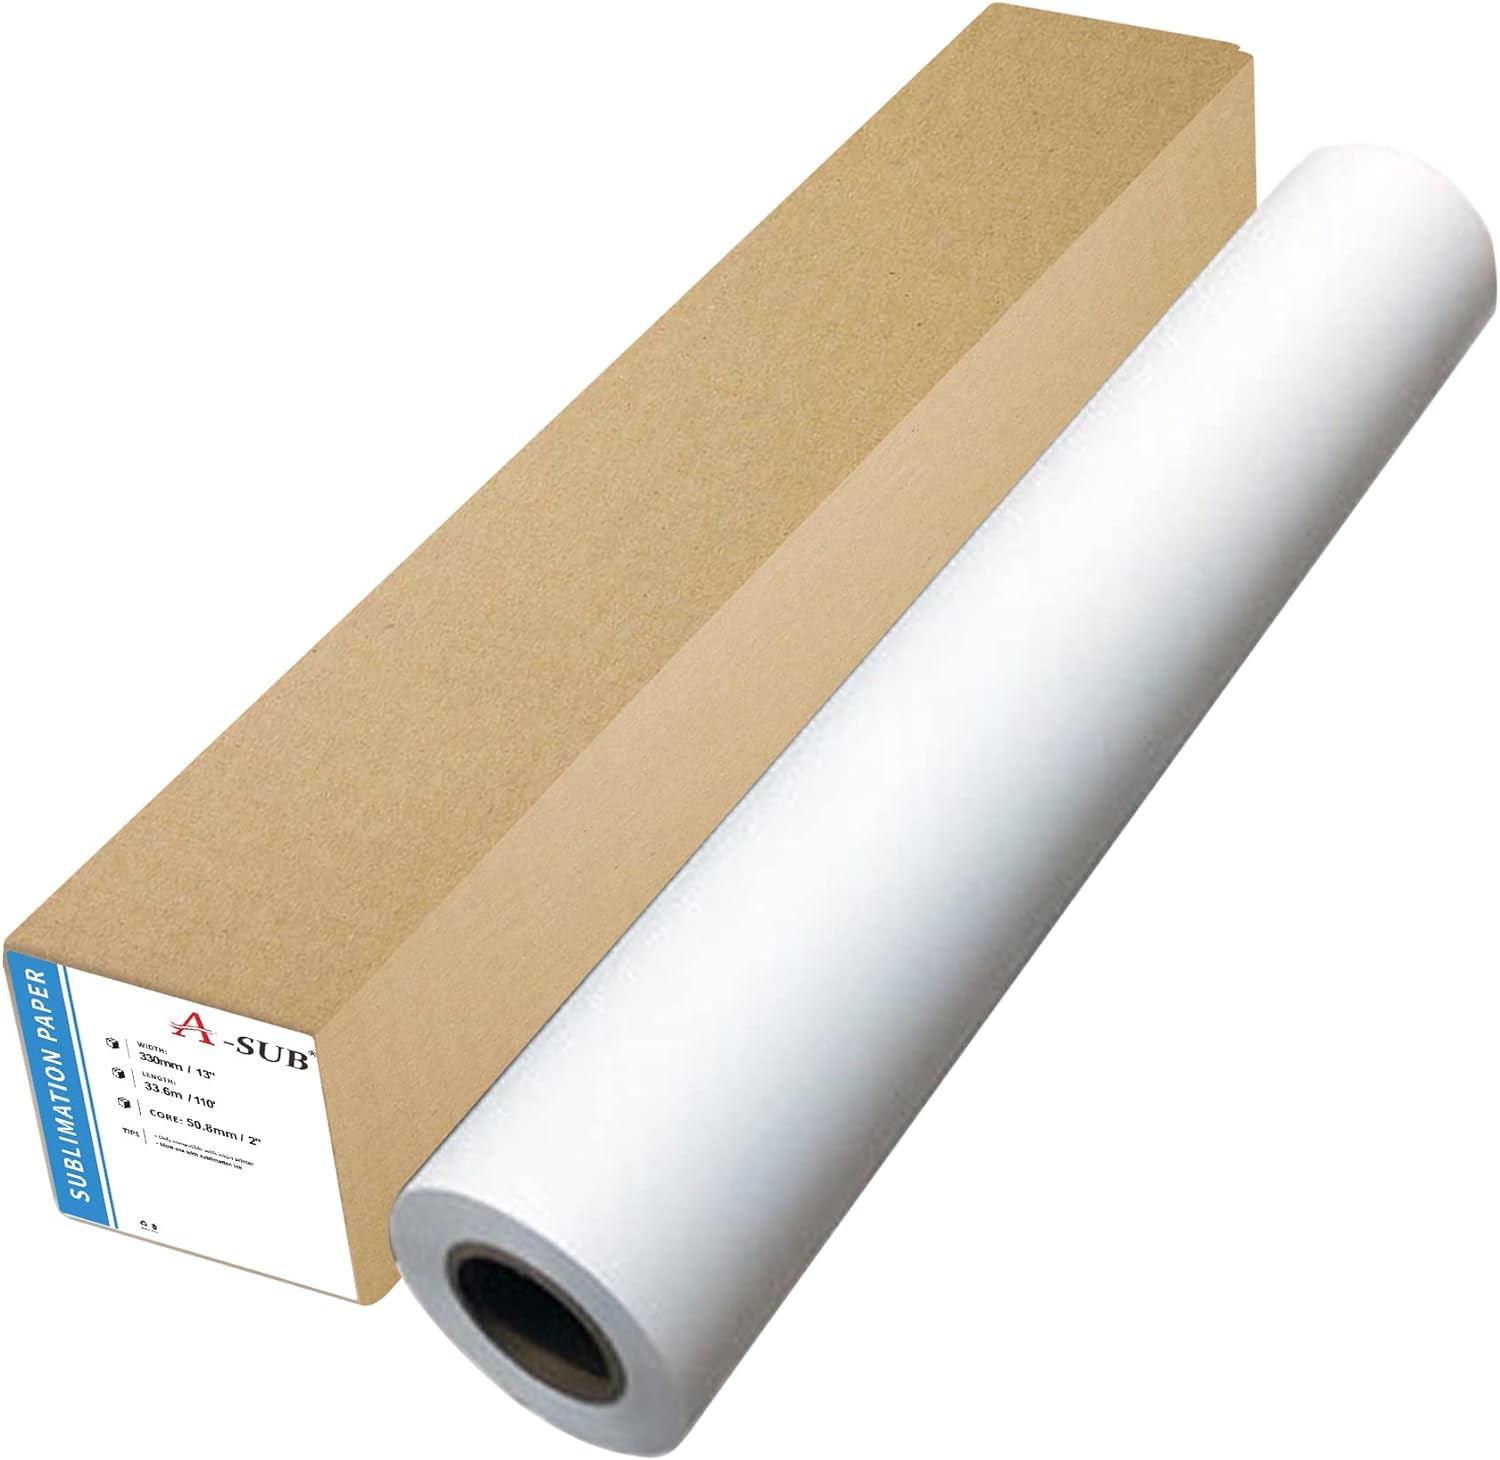 A-SUB Sublimation Paper Heat Transfer 110 Sheets 8.5 x 11 Inches